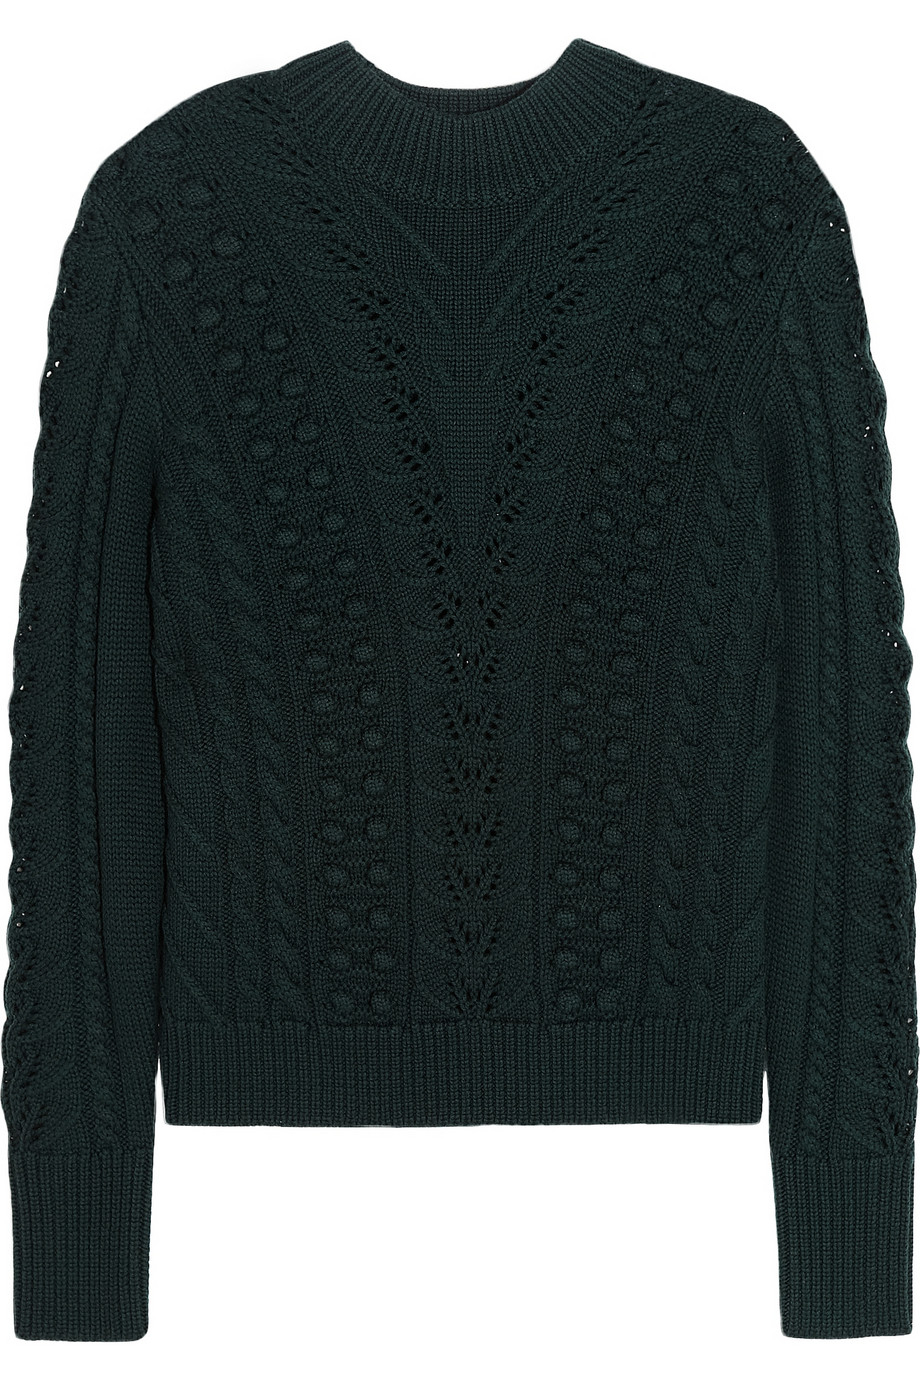 Temperley london Falcon Cable-Knit Wool Sweater in Green (Forest green ...